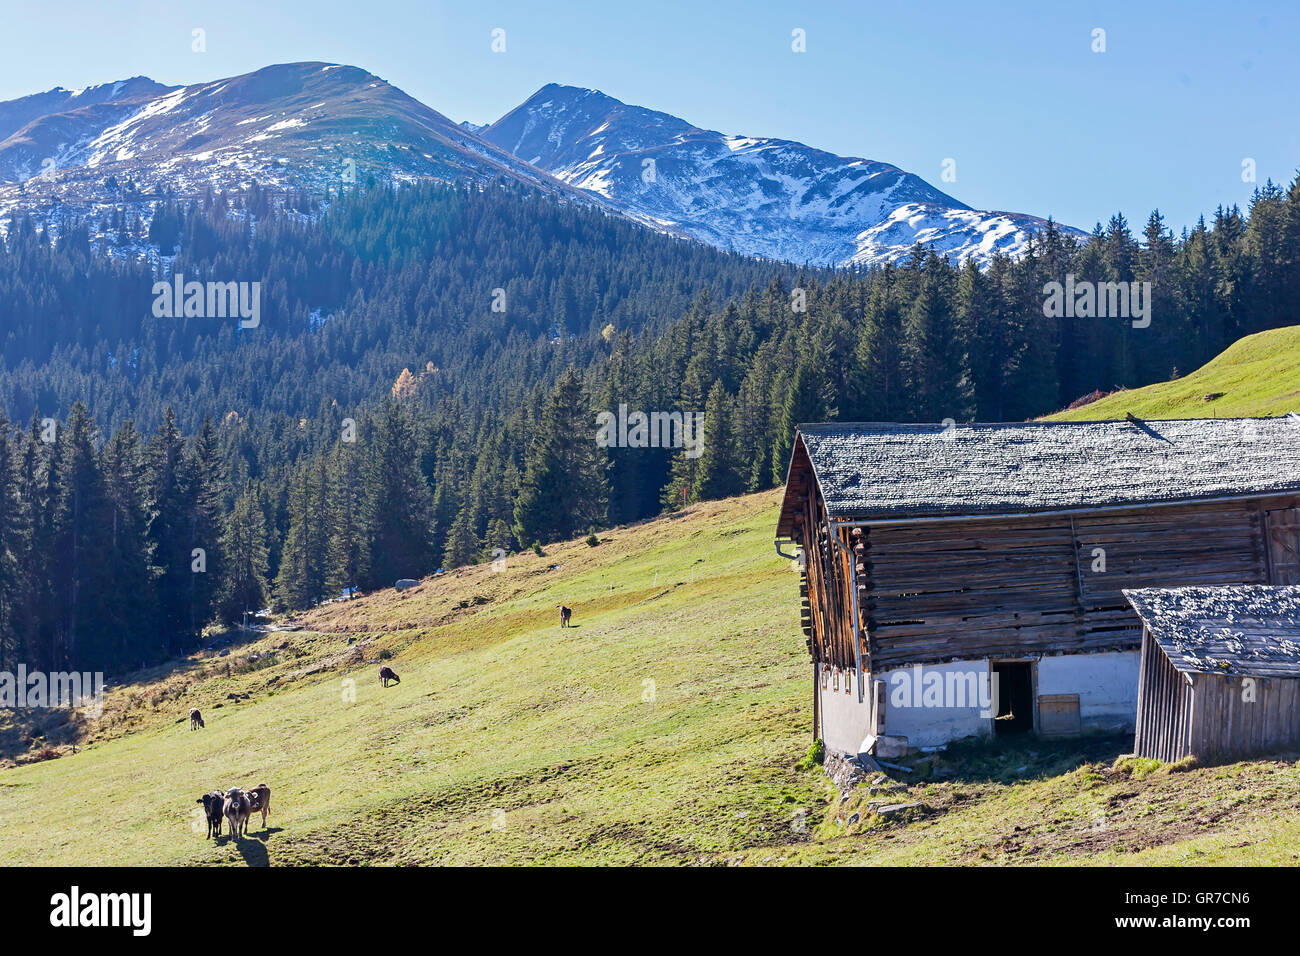 Mountain Landscape With Hay Hut In Val Medel In Switzerland Stock Photo